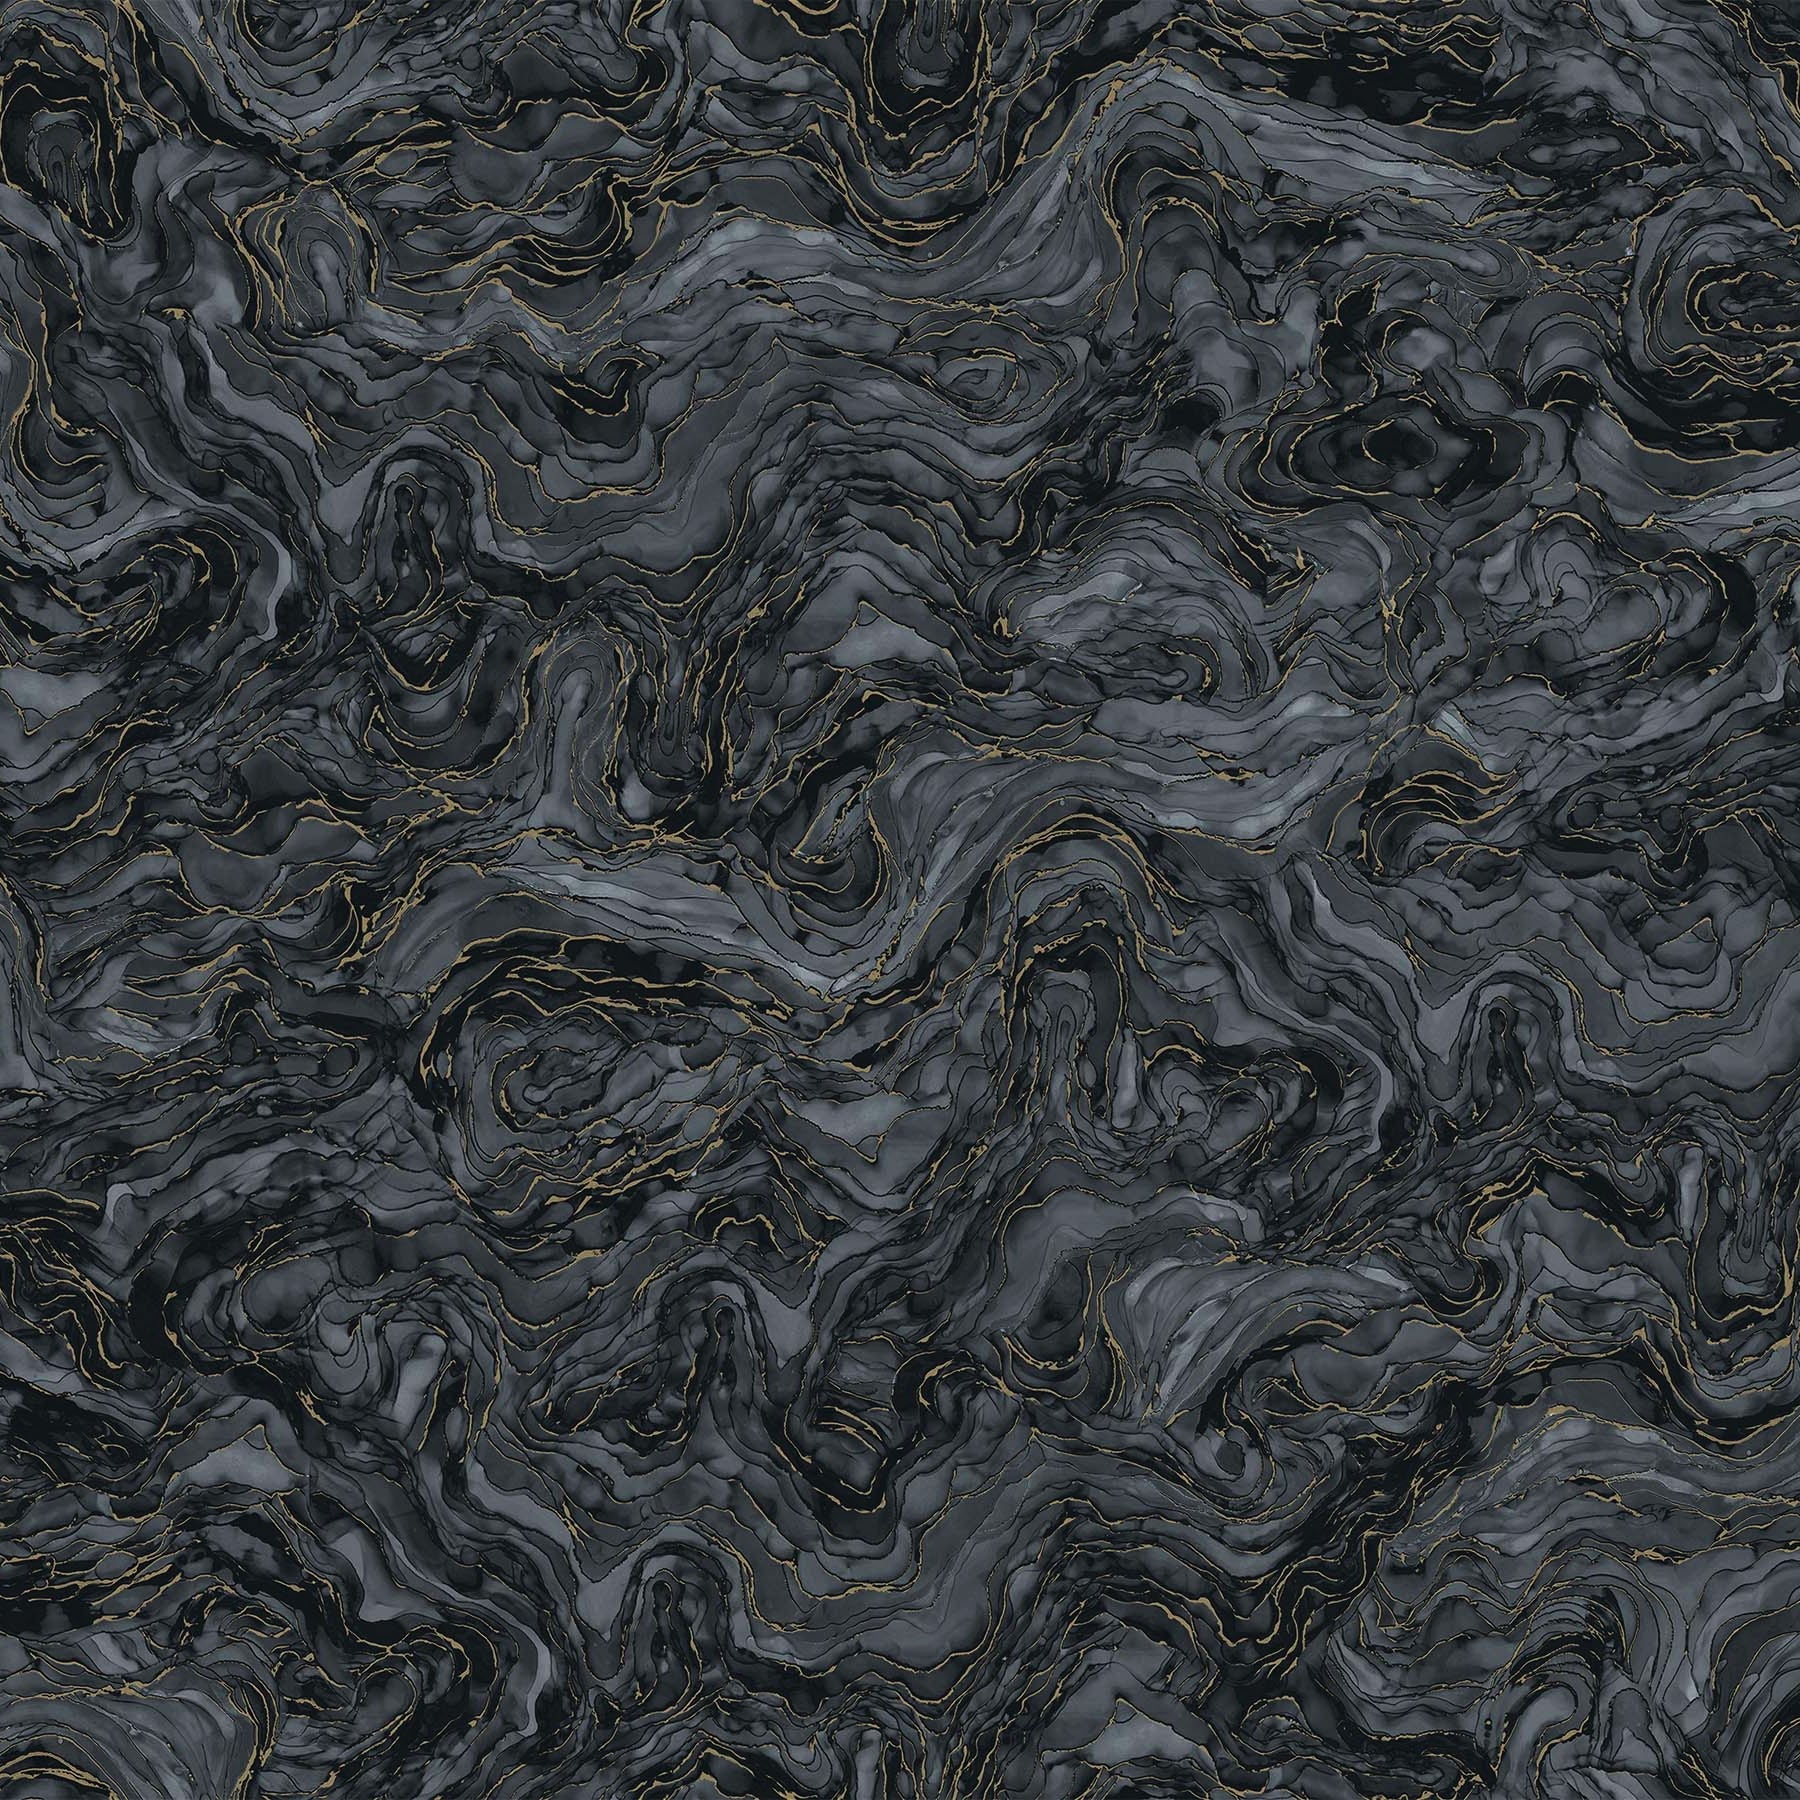 Midas Touch Charcoal Swirl Fabric